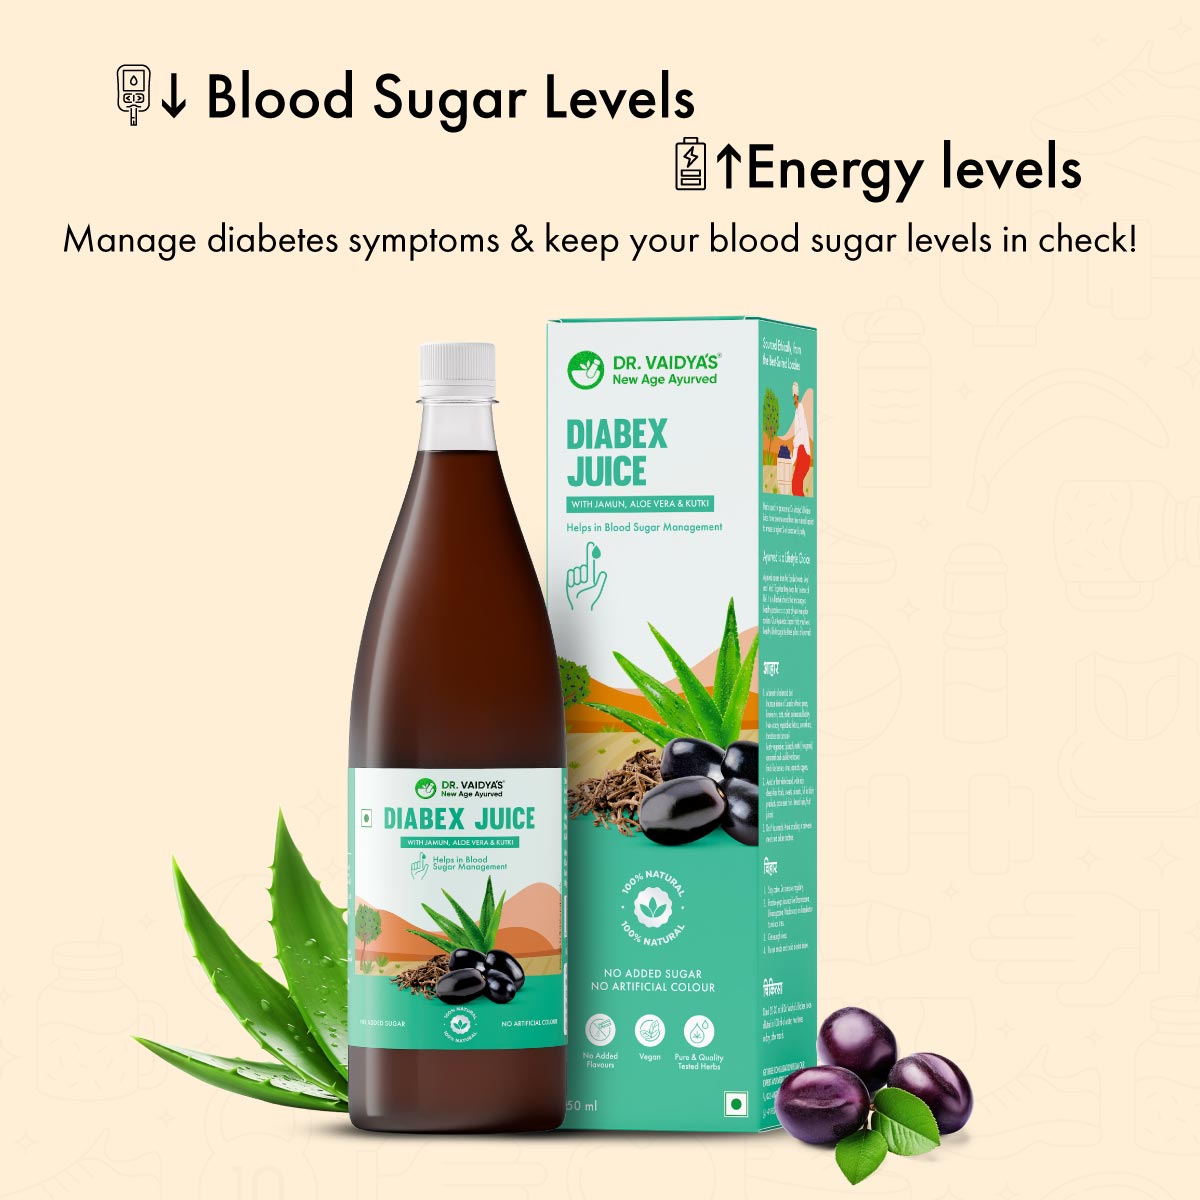 Dr. Vaidya's Diabex Juice: Manage Blood Sugar Levels with Every Sip!